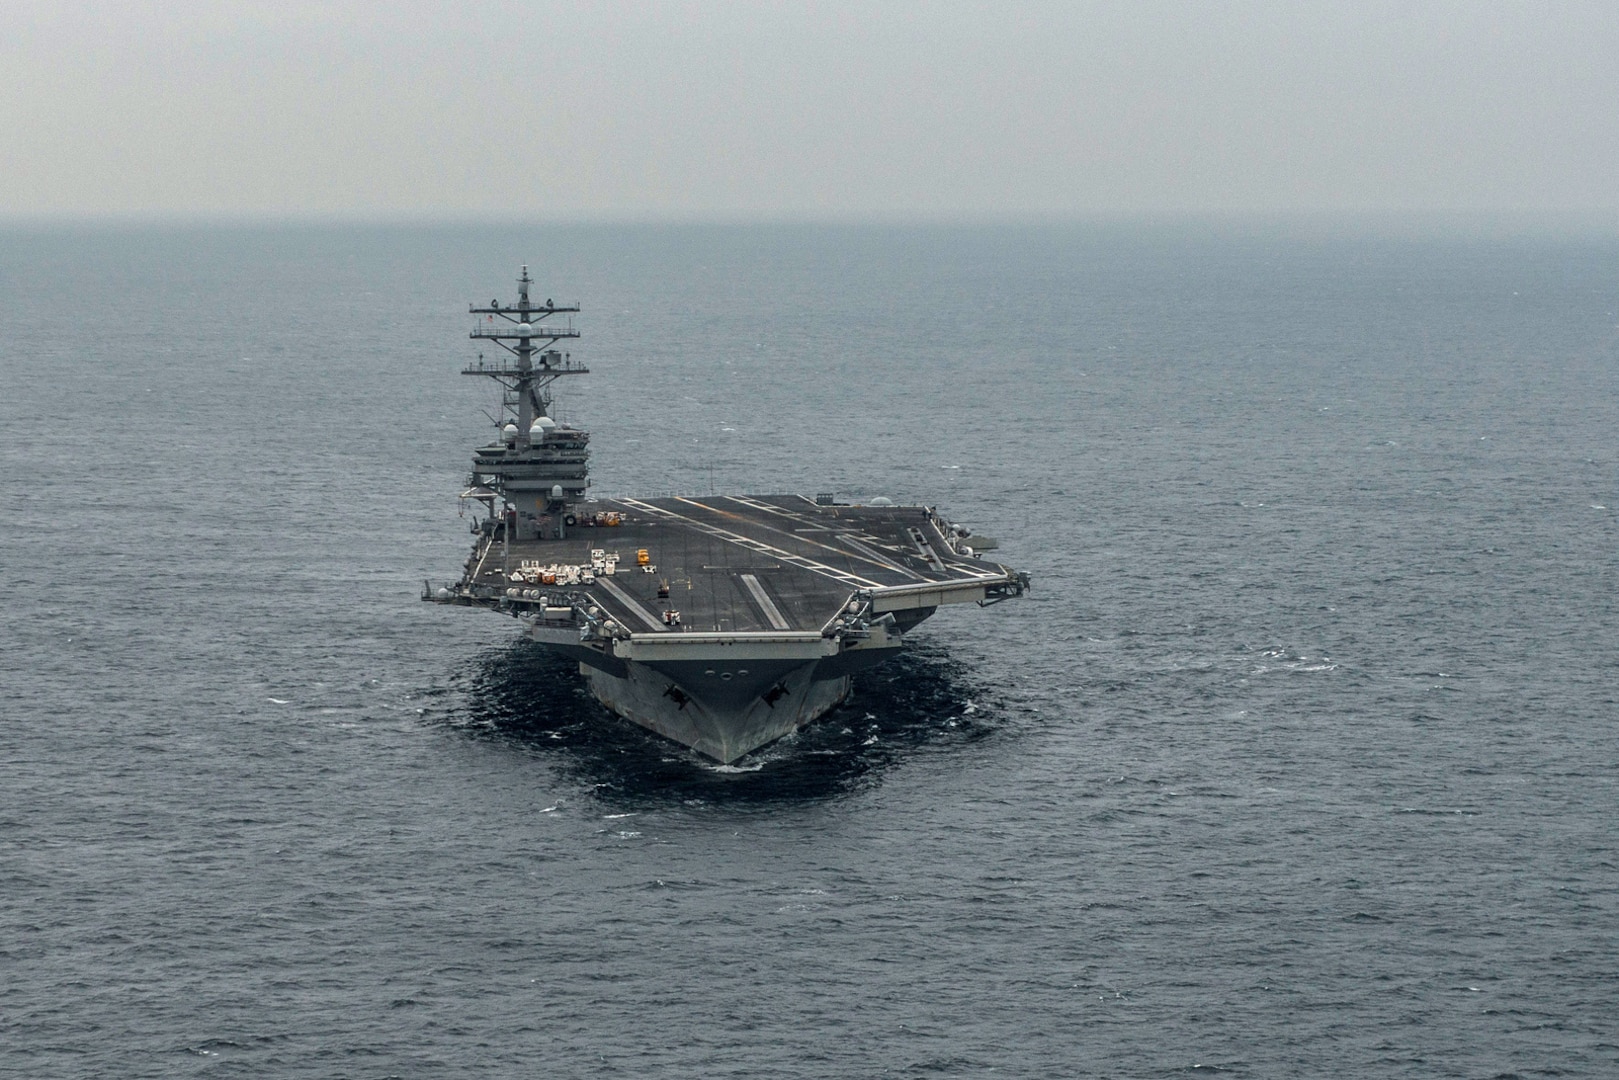 In this file photo, the Navy's only forward-deployed aircraft carrier, USS Ronald Reagan (CVN 76), patrols waters south of Japan, before returning to Commander, Fleet Activities Yokosuka, at the end of a three-month patrol in the Indo-Asia-Pacific region. During the patrol, Ronald Reagan participated in exercises Valiant Shield, Invincible Spirit and Keen Sword, designed to enhance joint military operations with partner nations throughout the region, Nov 21, 2016. The crew also completed its Unit Level Training Assessment-Sustainment and Maintenance and Material Management Assessment. Ronald Reagan, the flagship of Carrier Strike Group 5, provides a combat-ready force that protects and defends the collective maritime interests of its allies and partners in the Indo-Asia-Pacific region. 